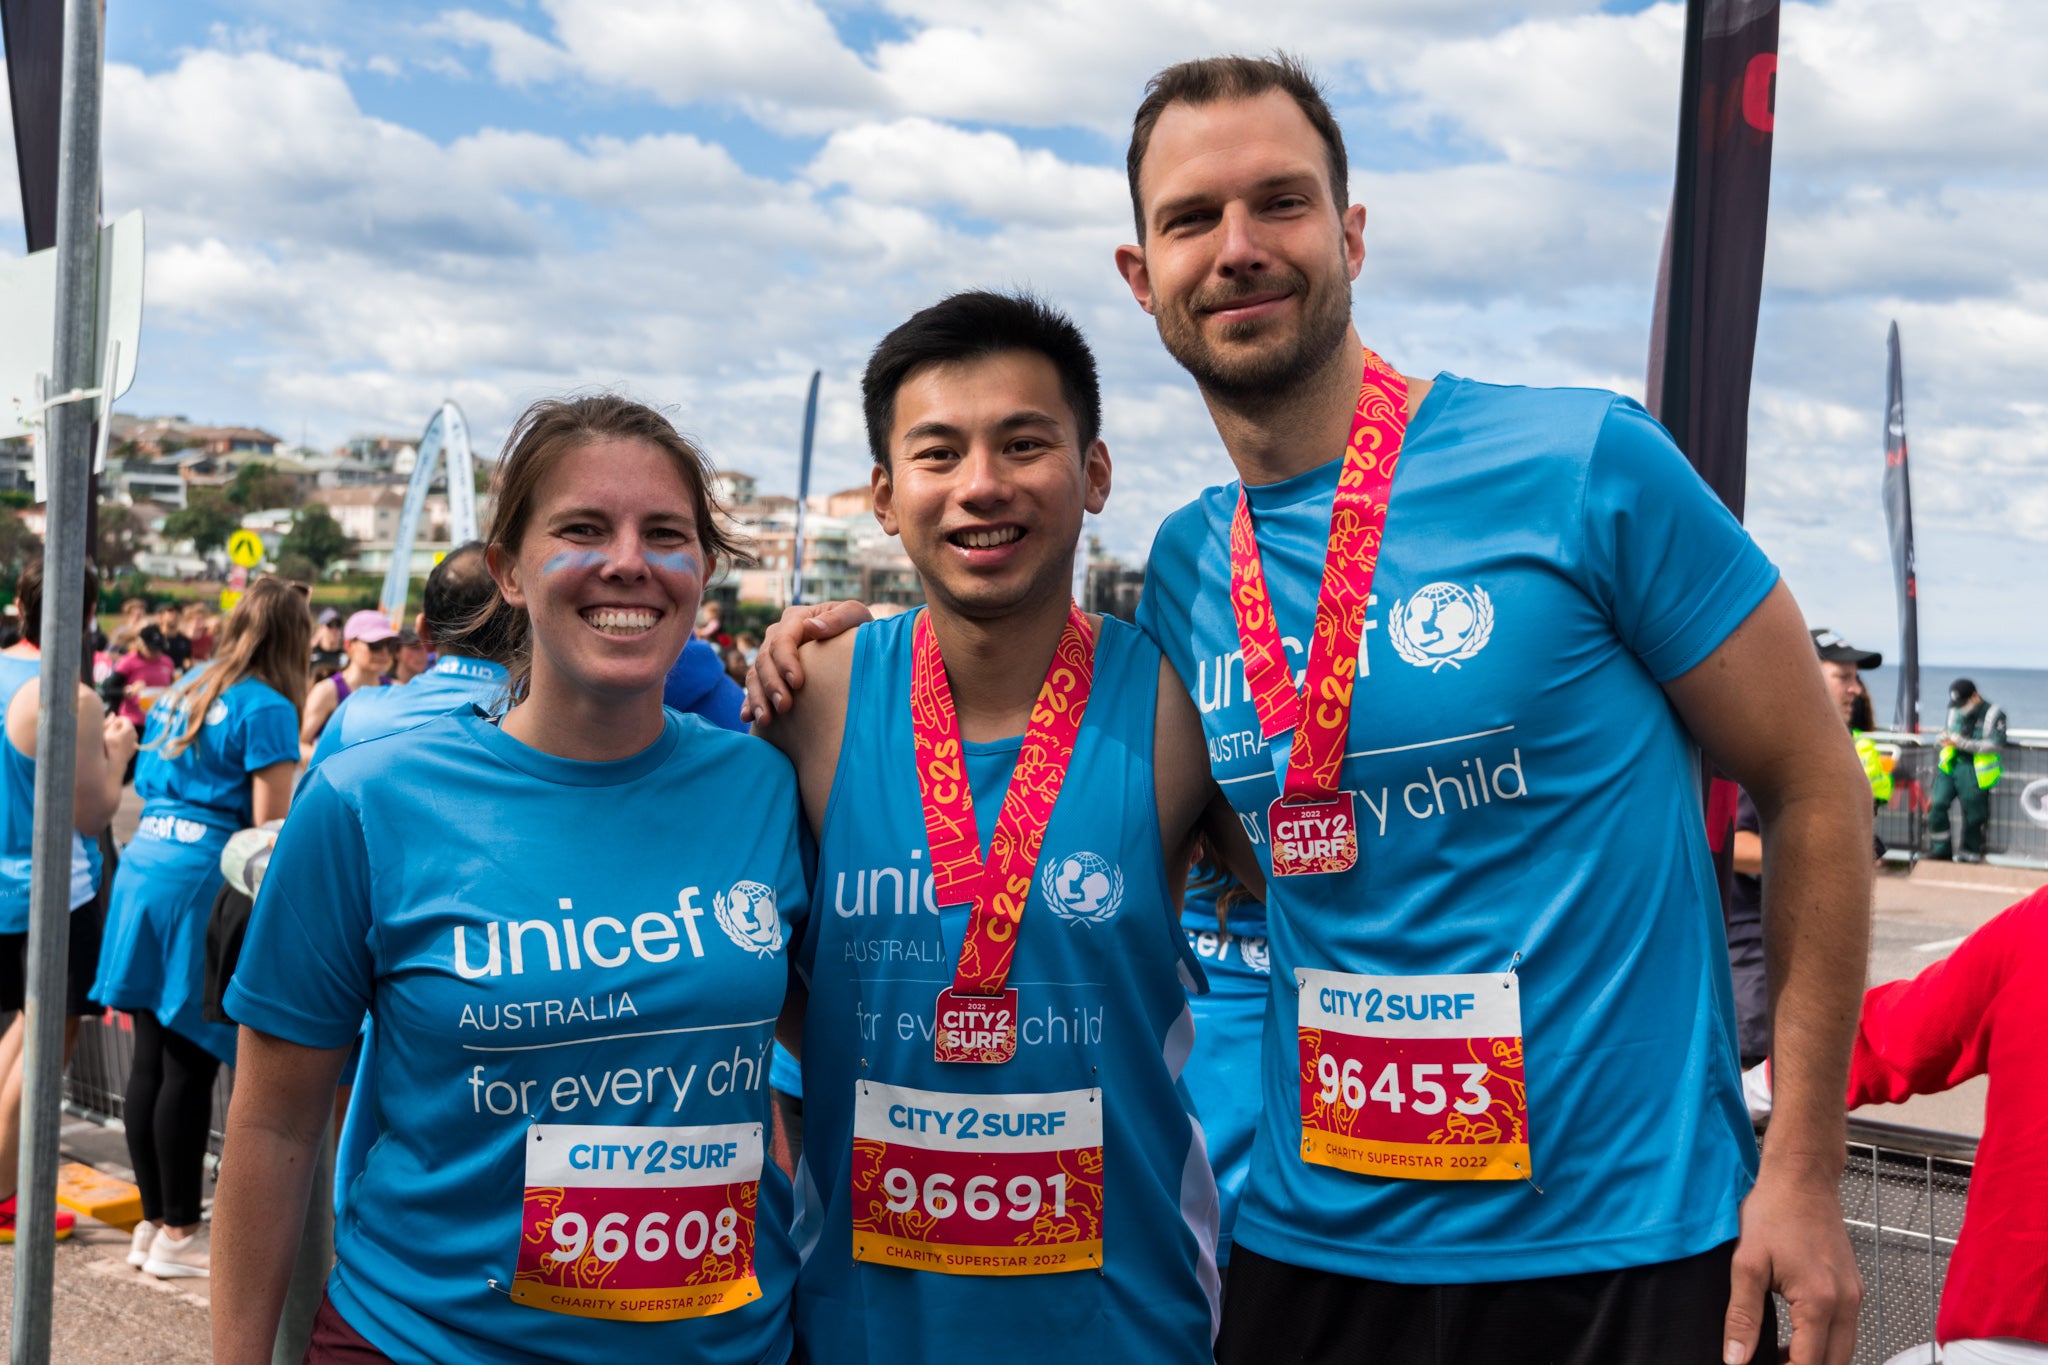 A group of three people wearing UNICEF T-shirts smile.